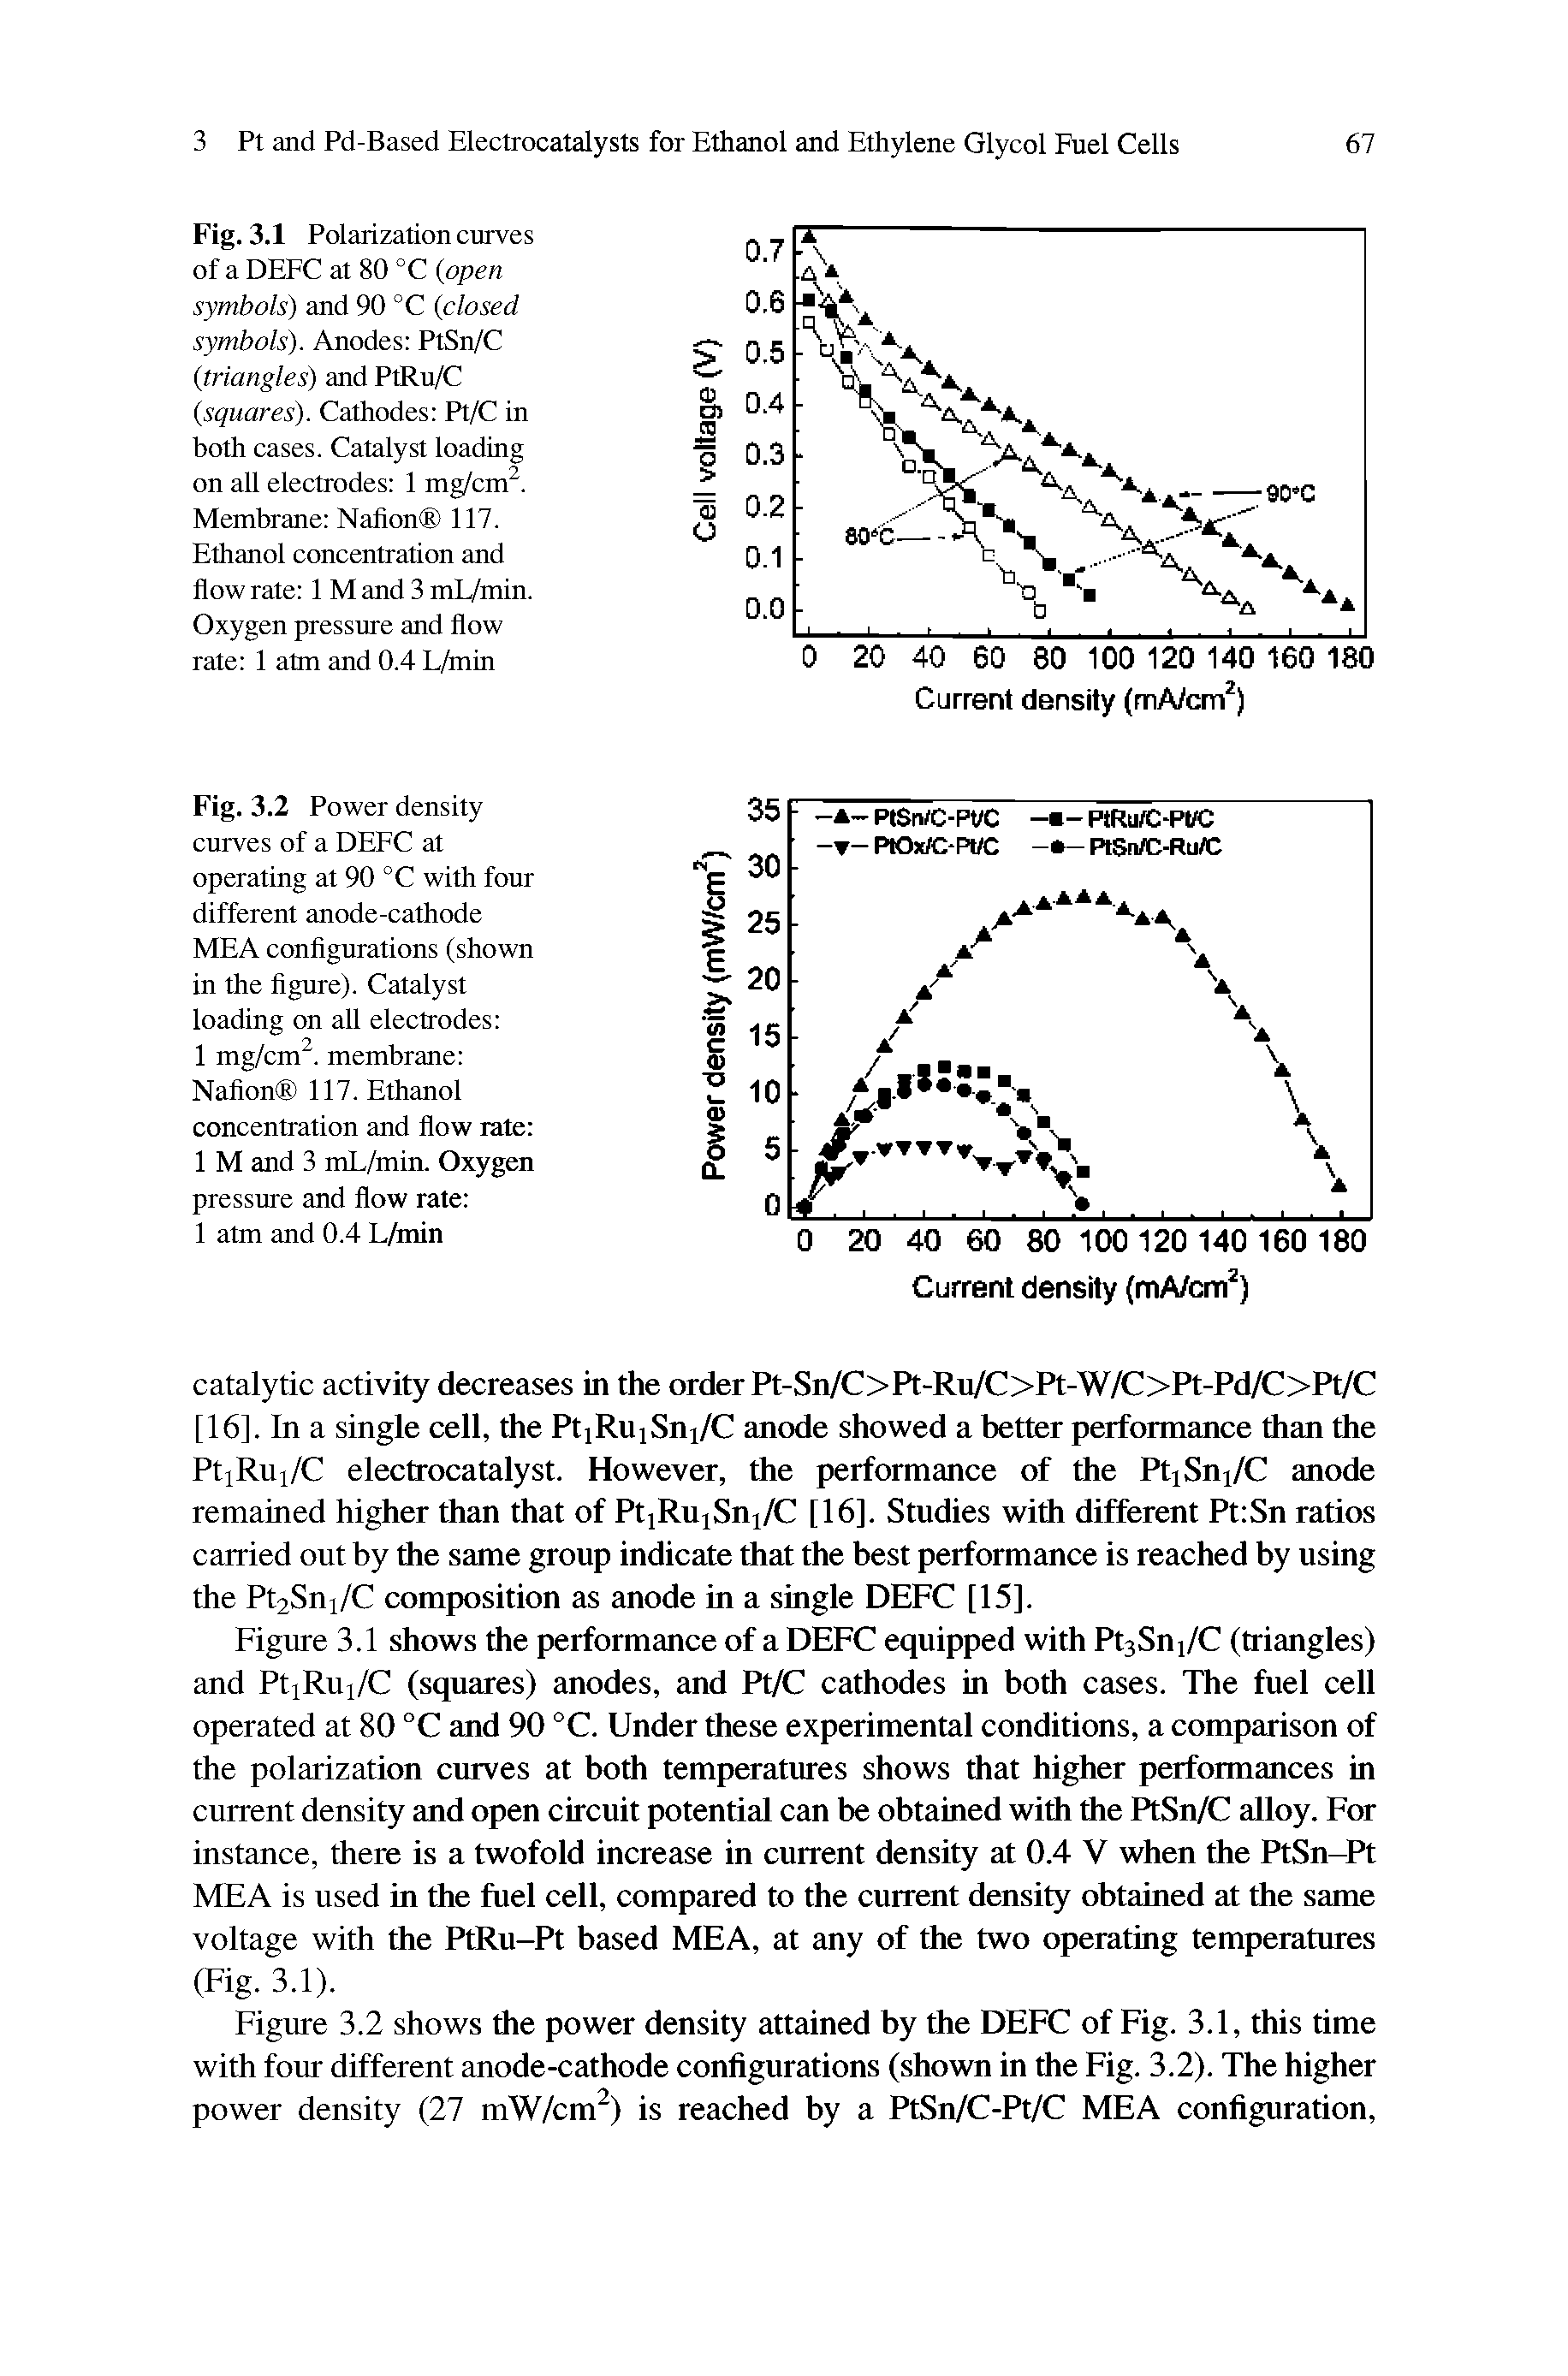 Fig. 3.1 Polarization curves of a DEEC at 80 °C (open symbols) and 90 °C (closed symbols). Anodes PtSn/C (triangles) and PtRu/C (squares). Cathodes Pt/C in both cases. Catalyst loading on all electrodes 1 mg/cm. Membrane Nafion 117. Ethanol concentration and flow rate 1 M and 3 mL/min. Oxygen pressure and flow rate 1 atm and 0.4 L/min...